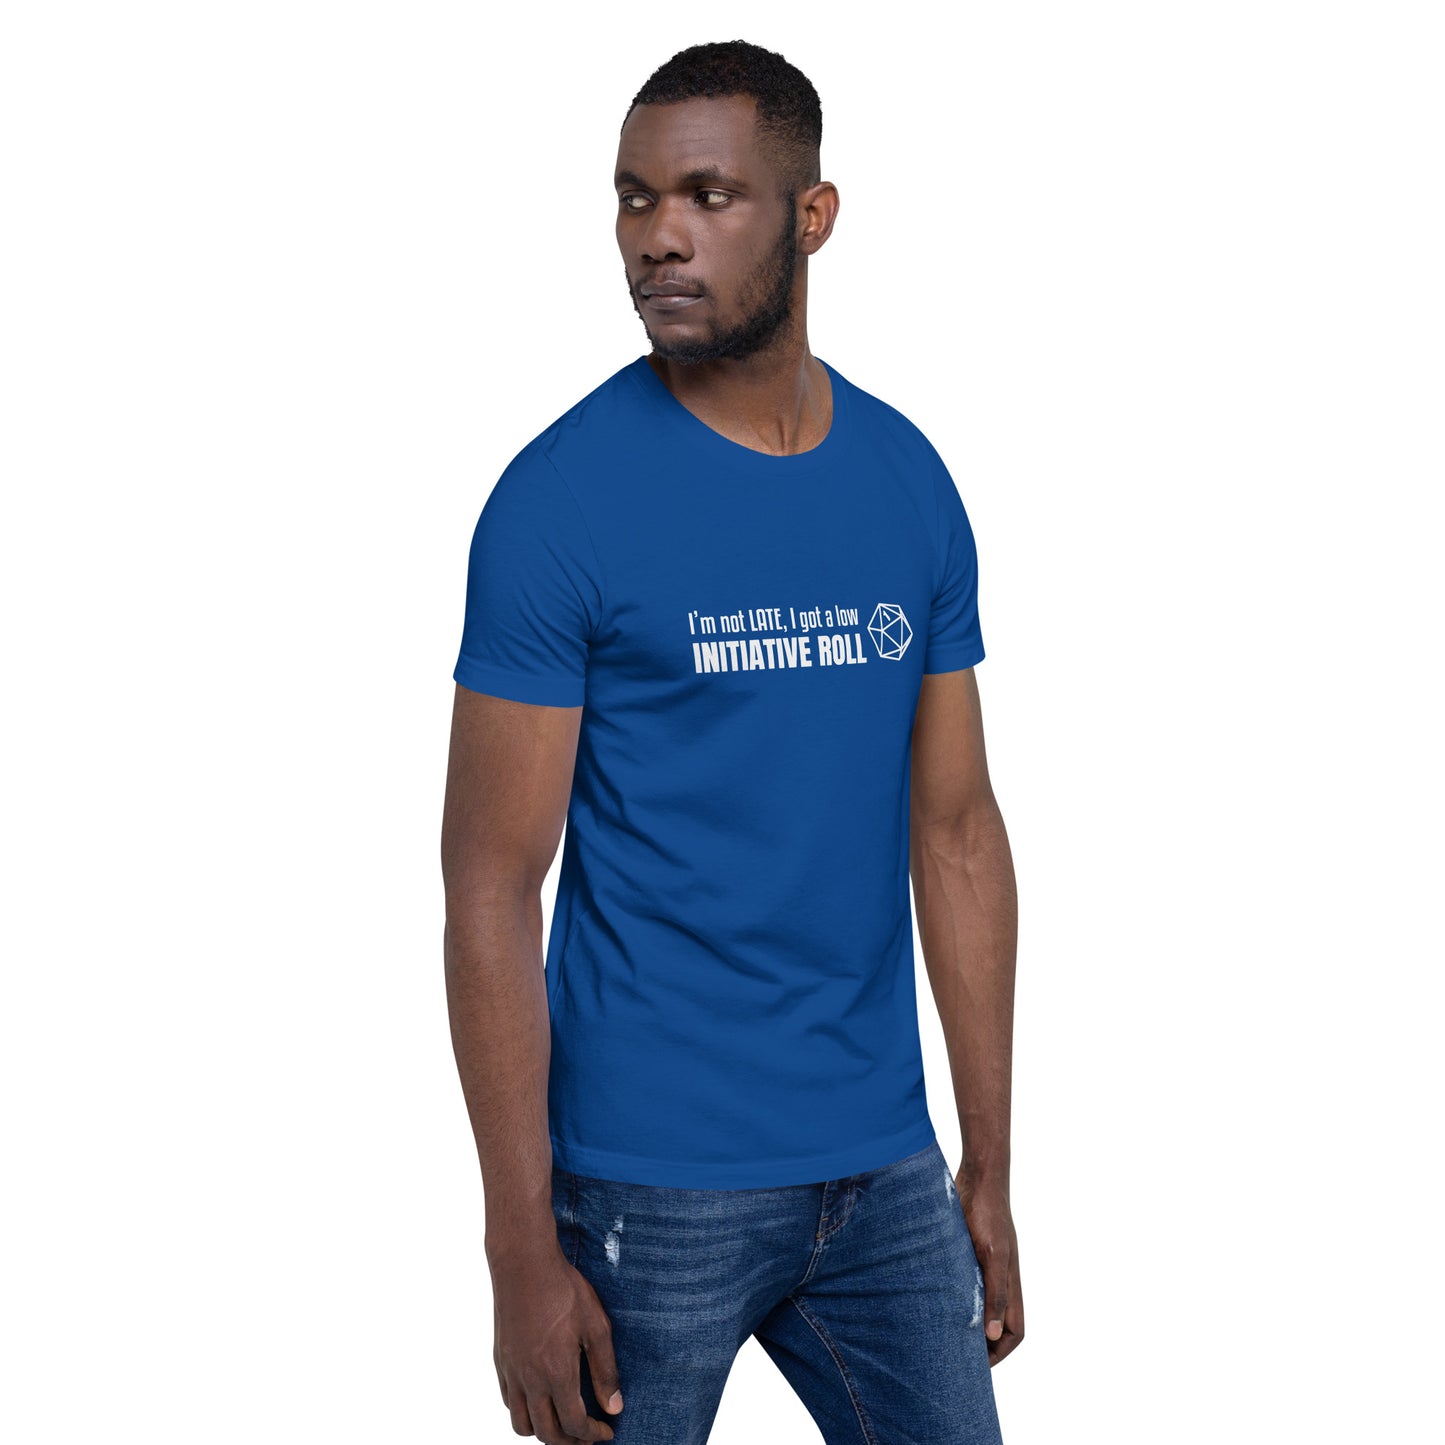 Male model wearing True Royal blue unisex t-shirt with a graphic of a d20 (twenty-sided die) showing a roll of "1" and text: "I'm not LATE, I got a low INITIATIVE ROLL"